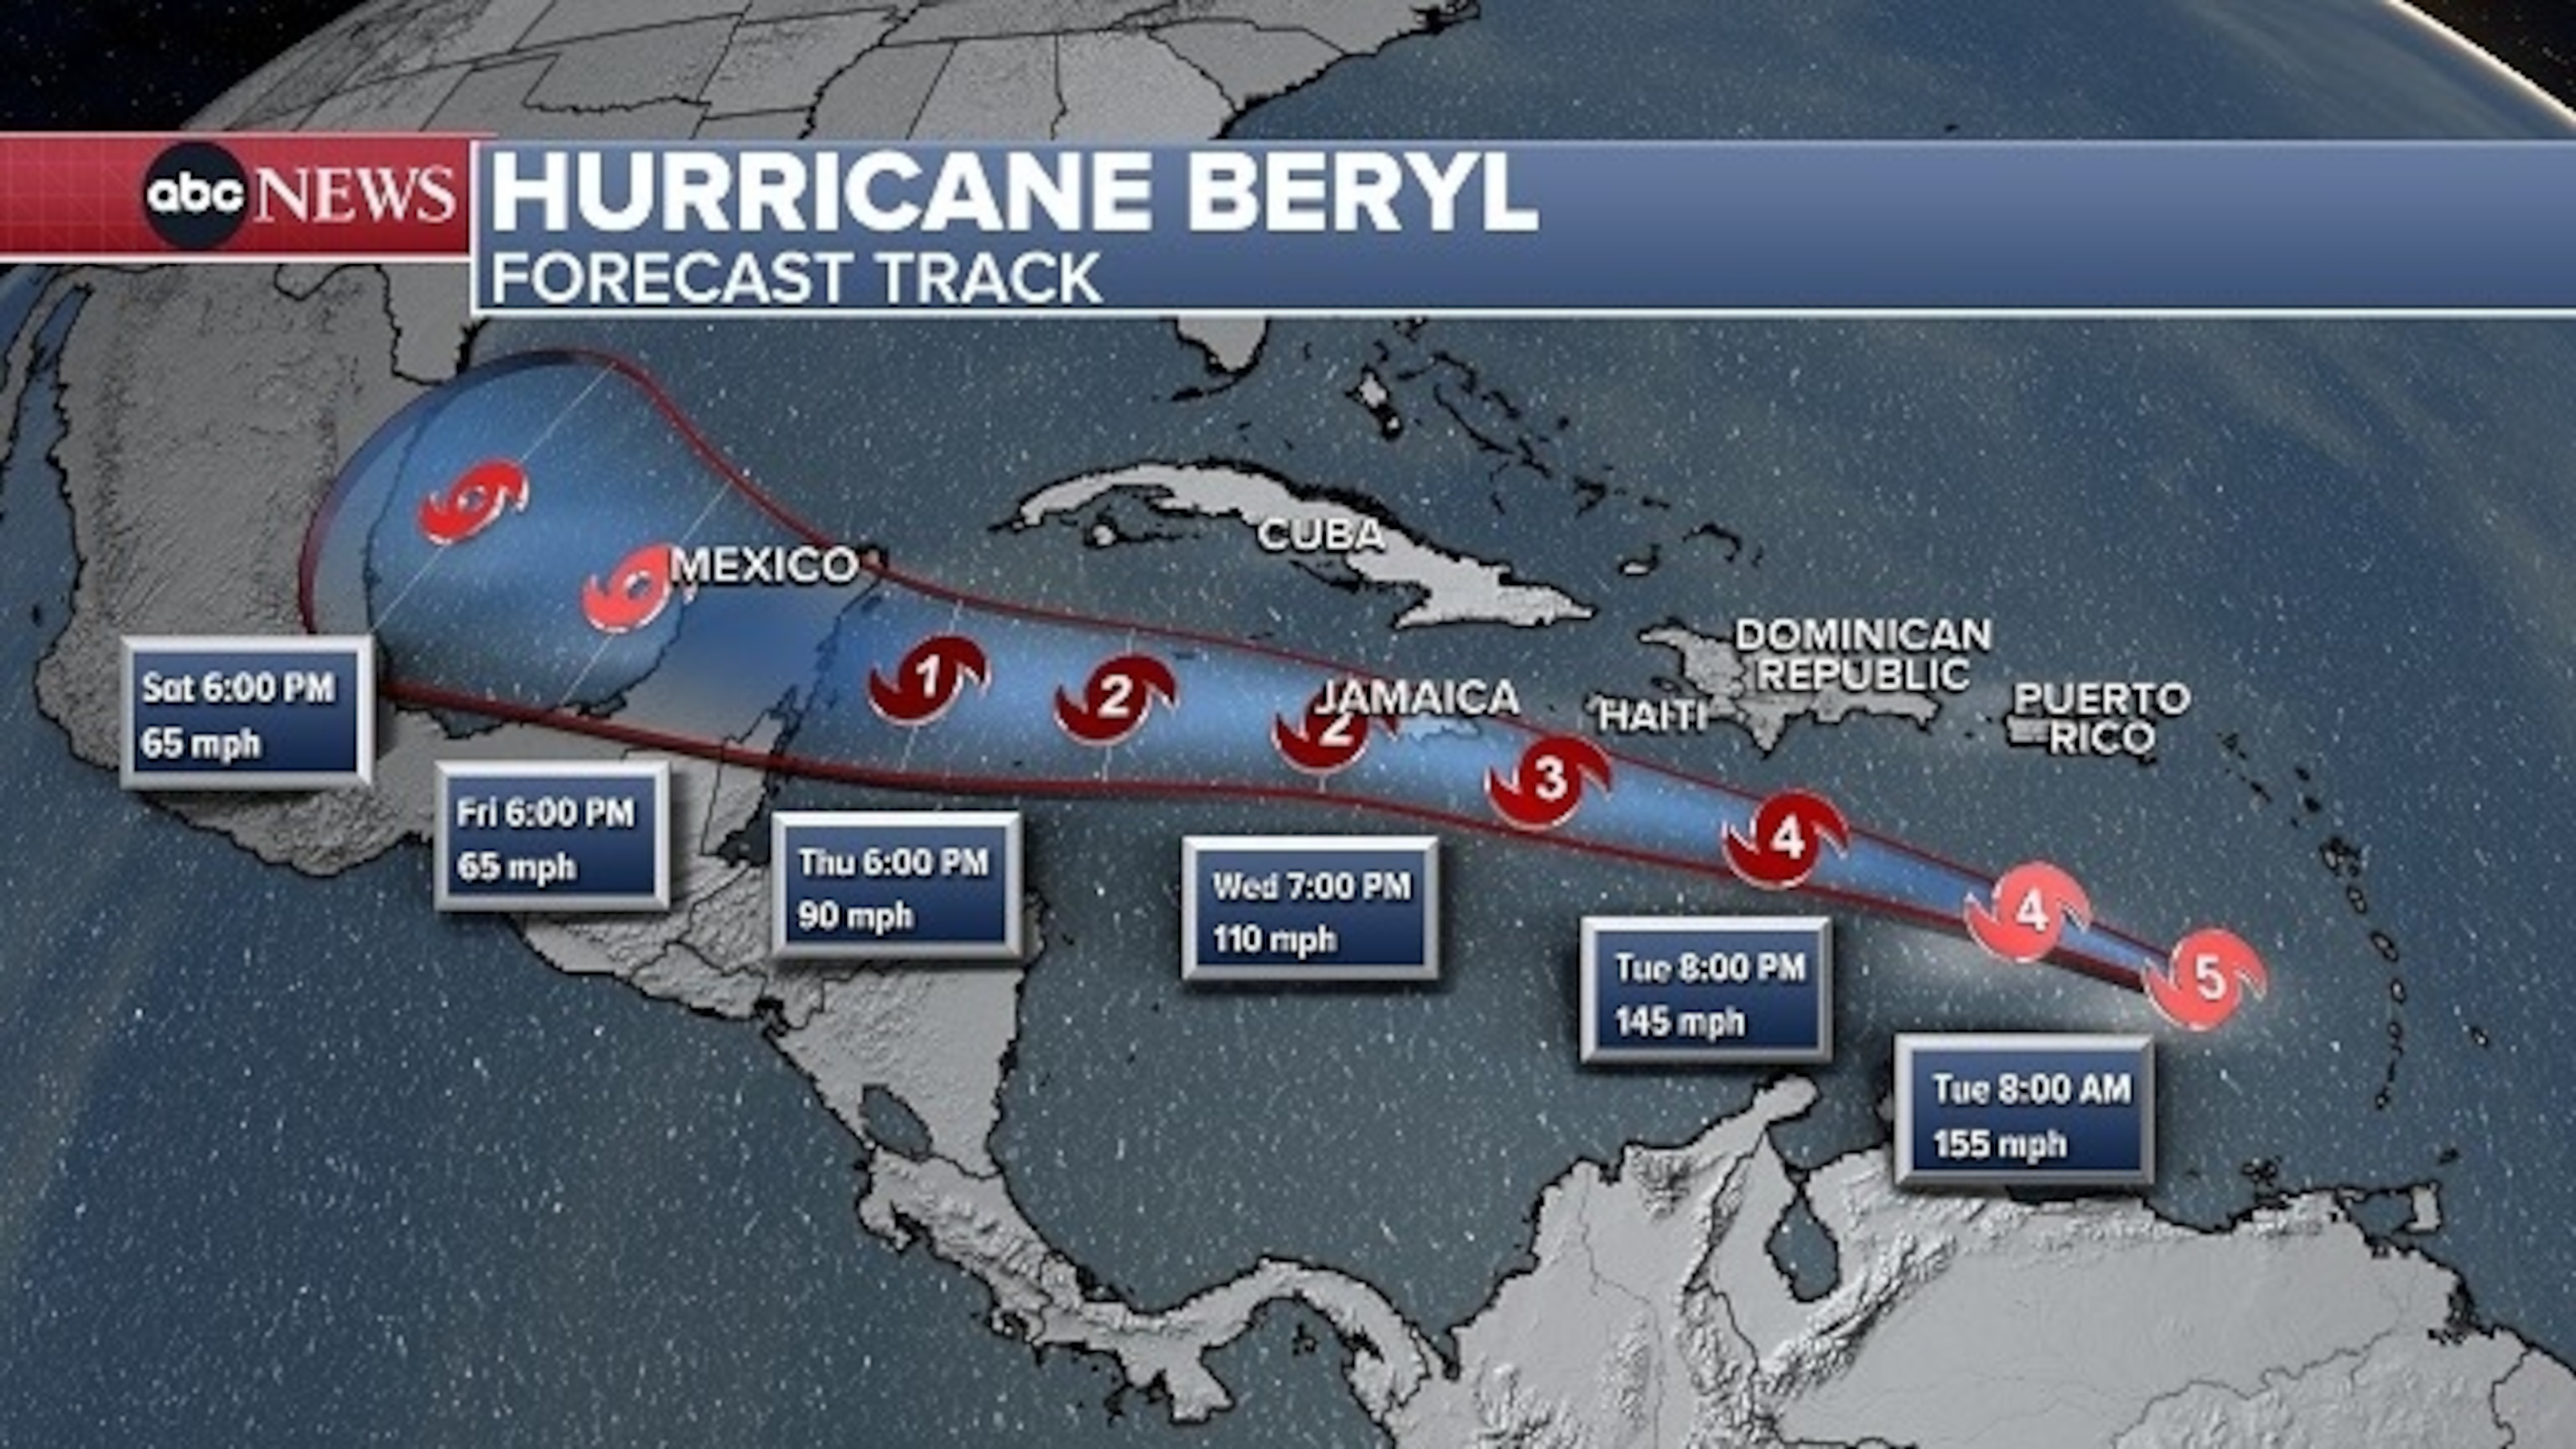 An illustration of the forecasted path of Hurricane Beryl (ABC News)